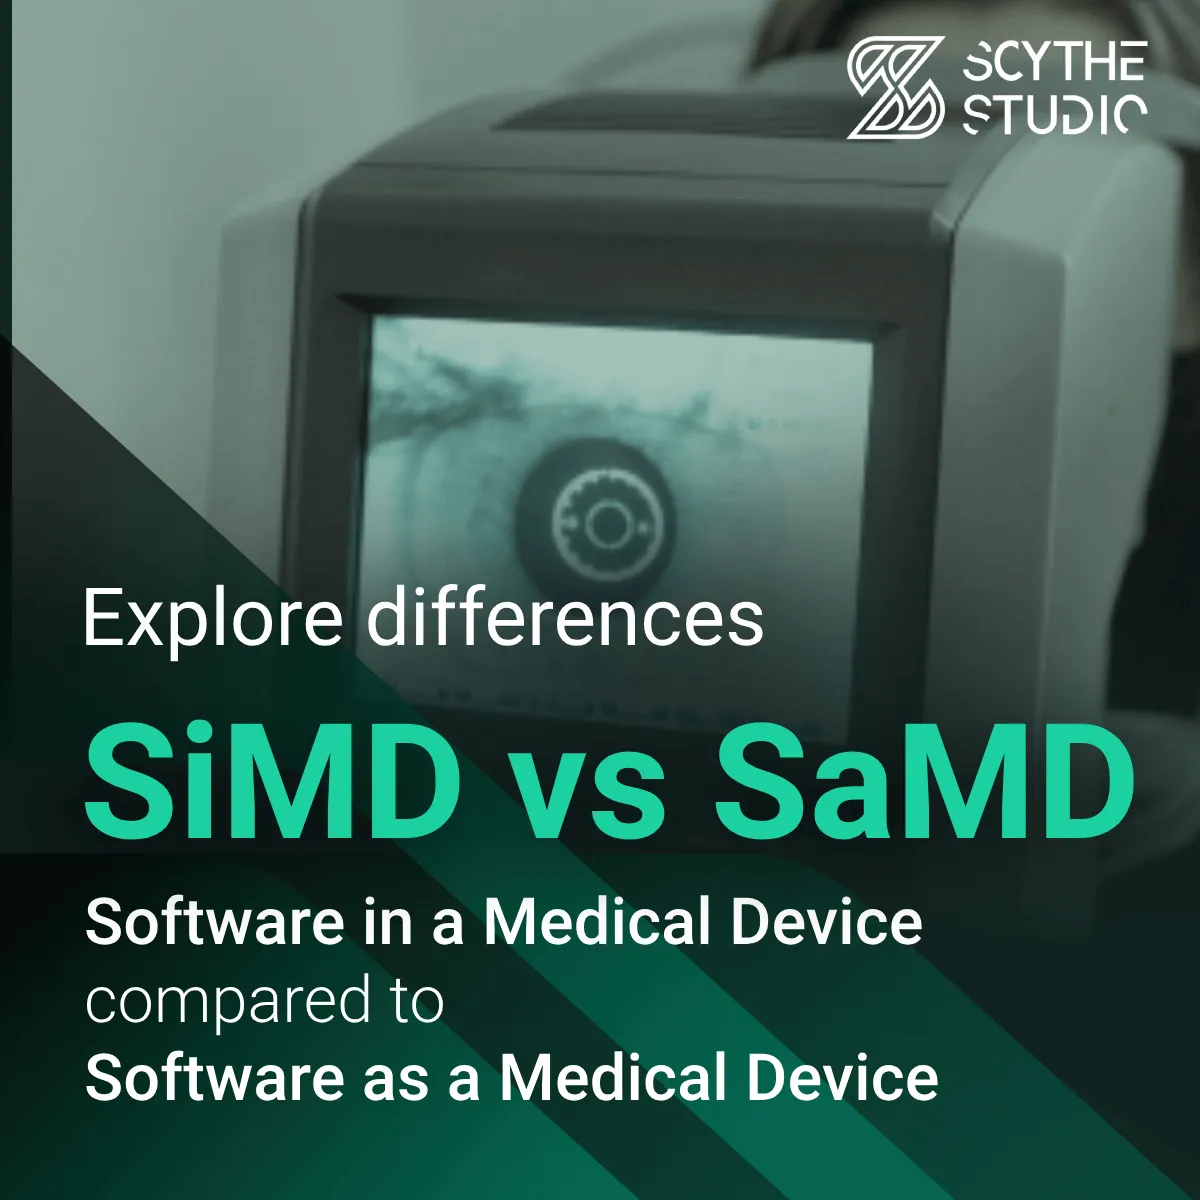 Software in a Medical Device (SiMD) vs Software as a Medical Device (SaMD) main image